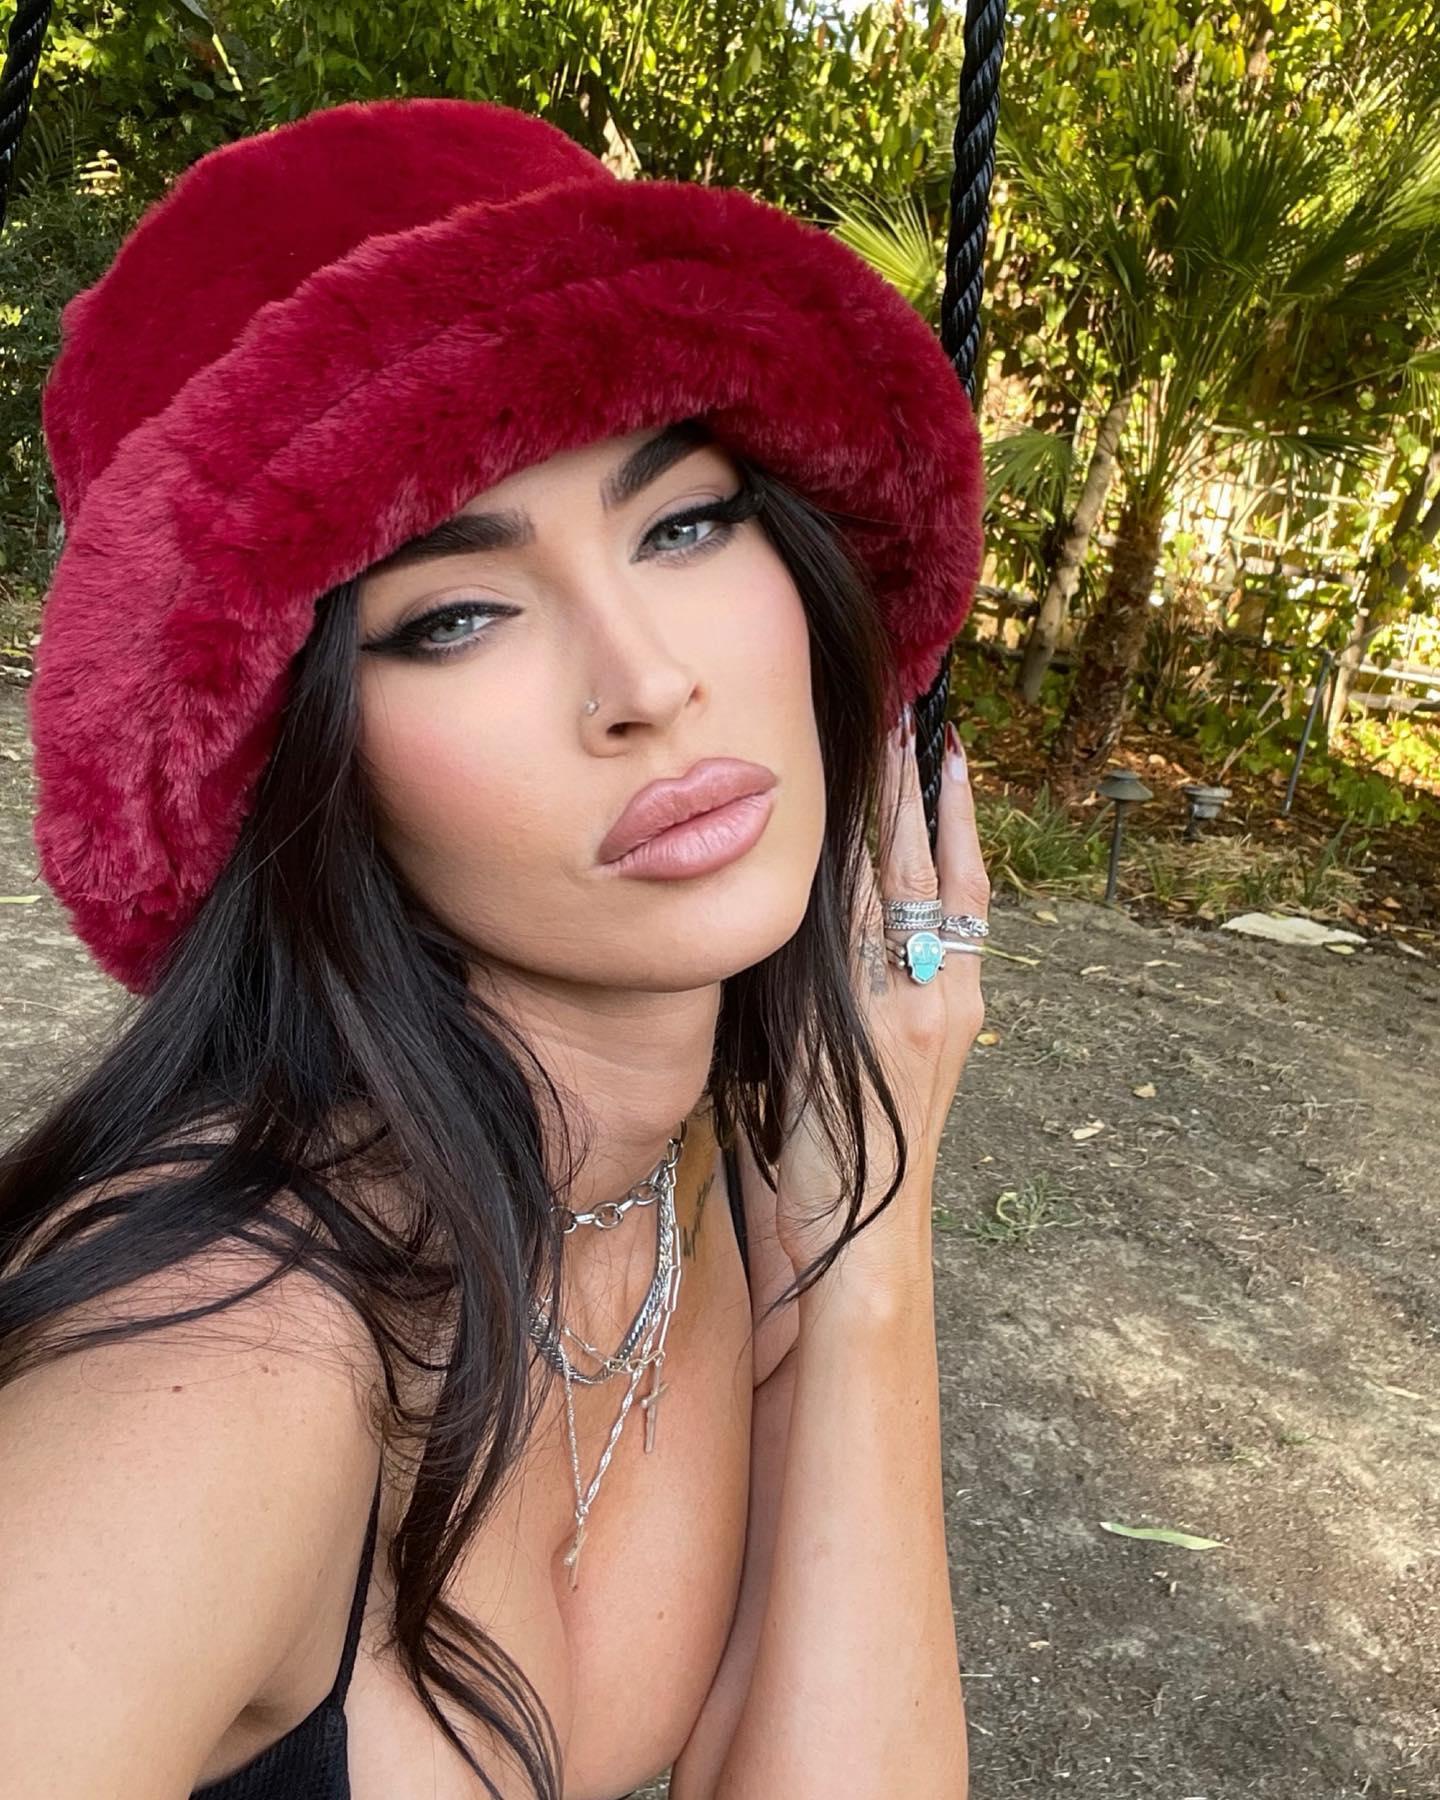 Megan Fox shares a selfie in a black top and red hat